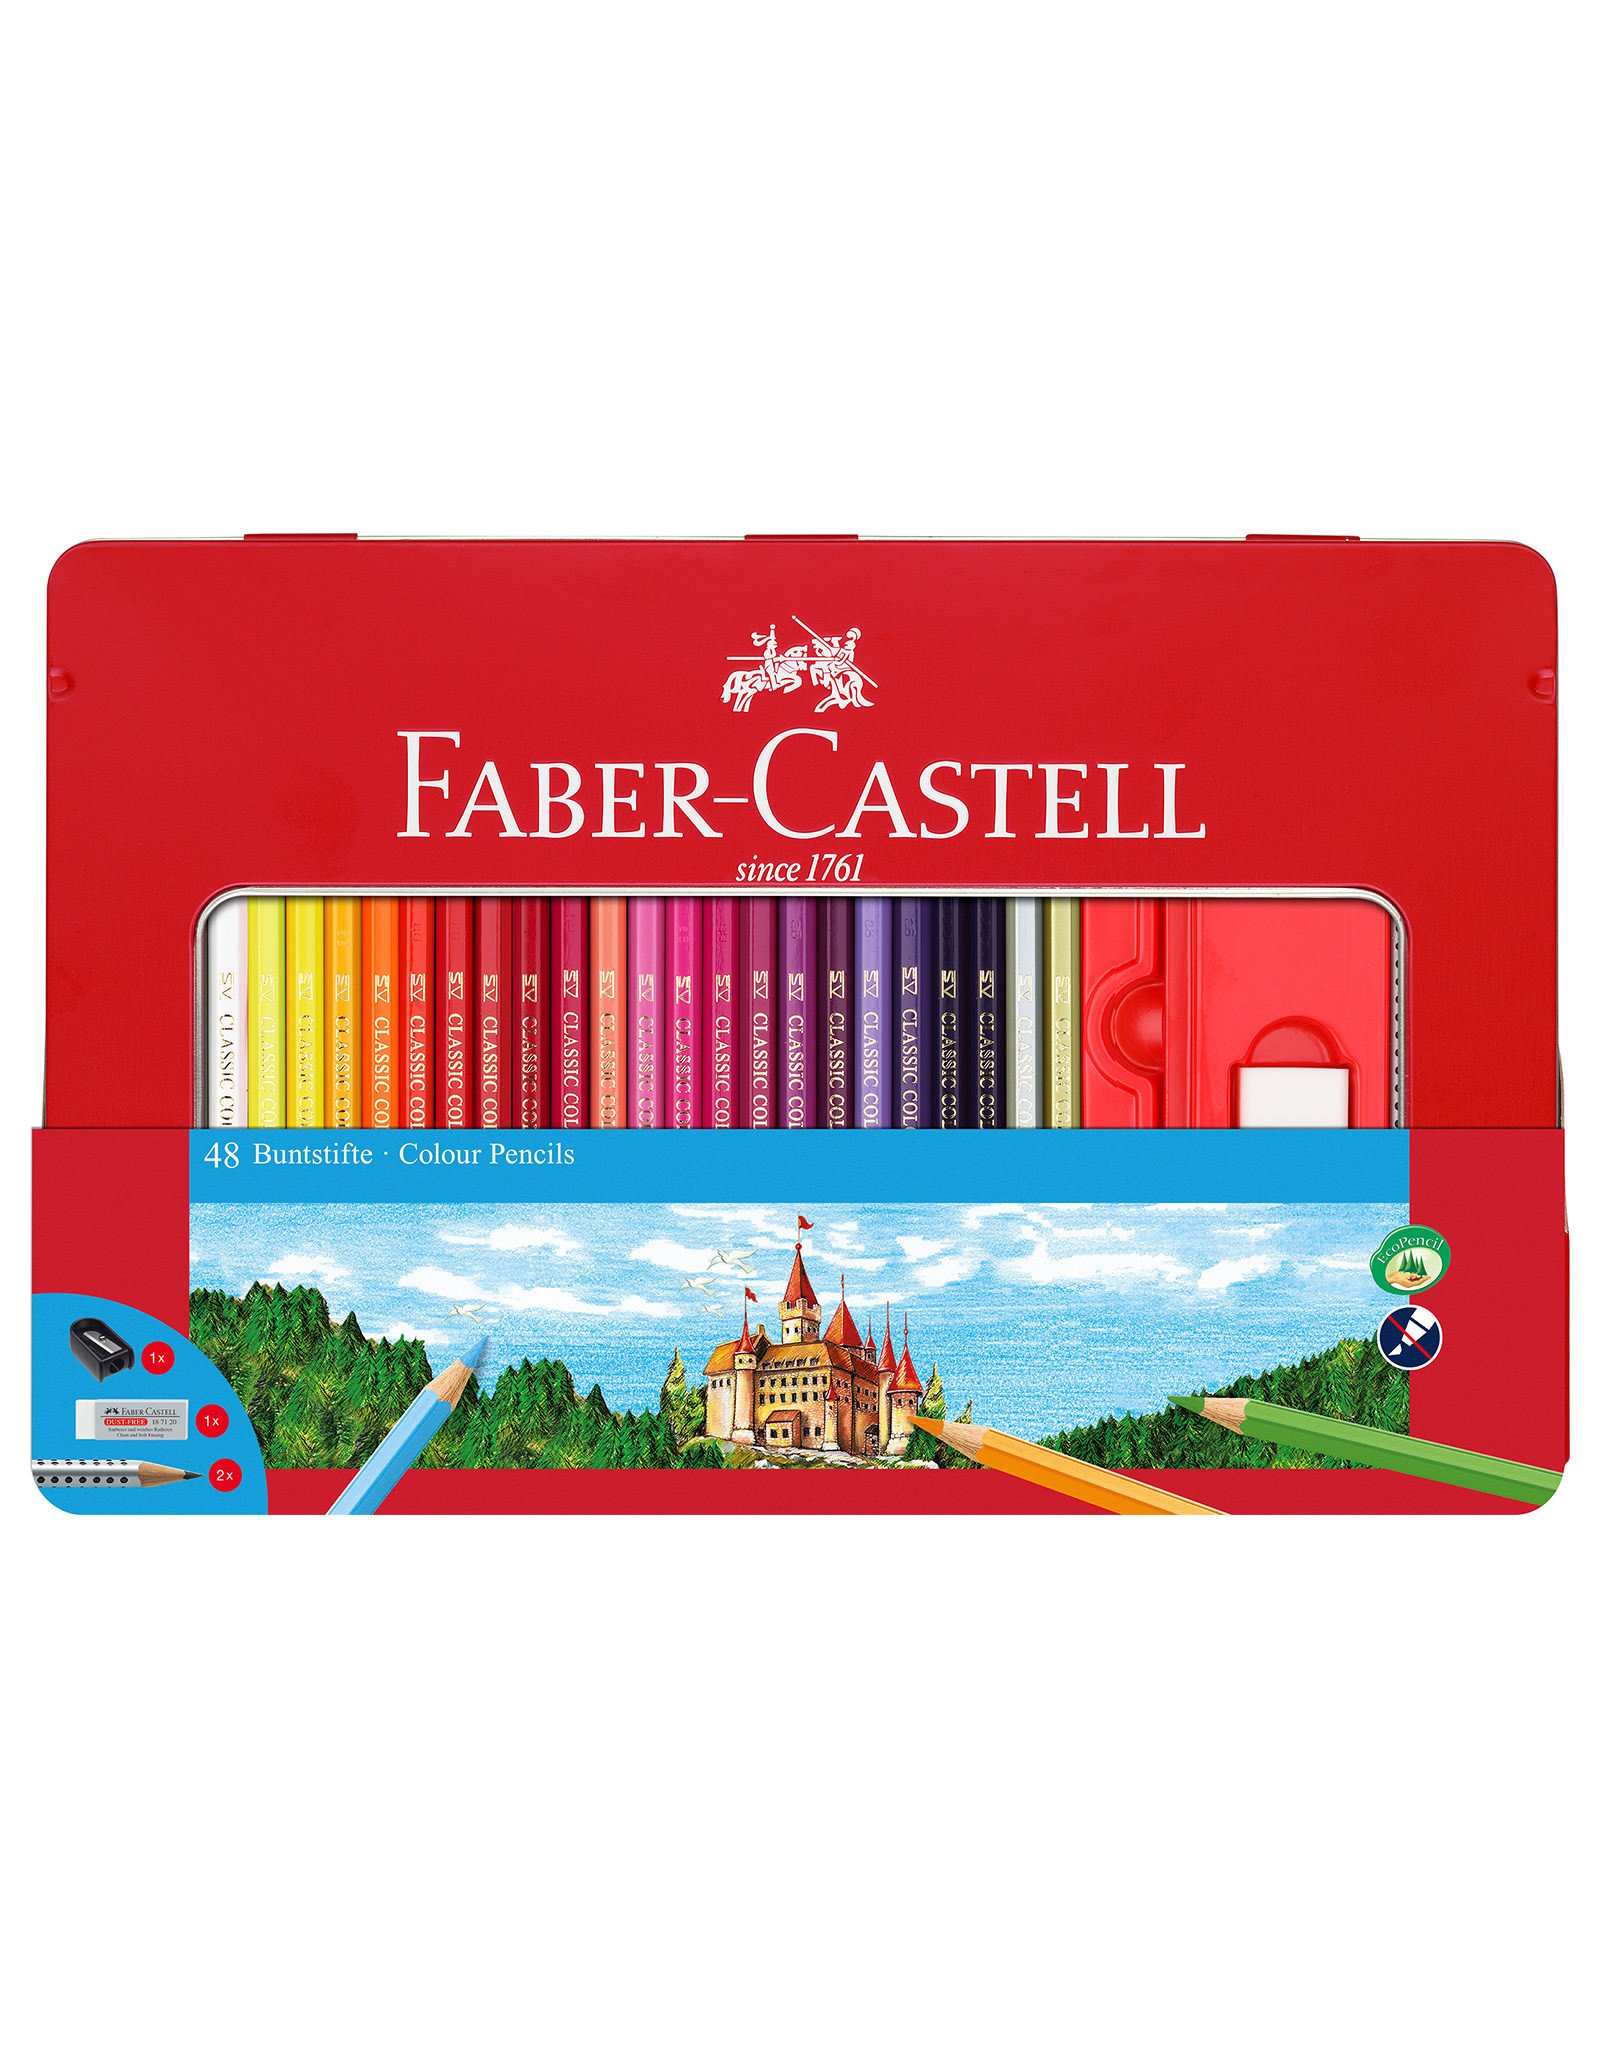 Faber-Castell Polychromos Oil-Based Colored Pencil Set of 24